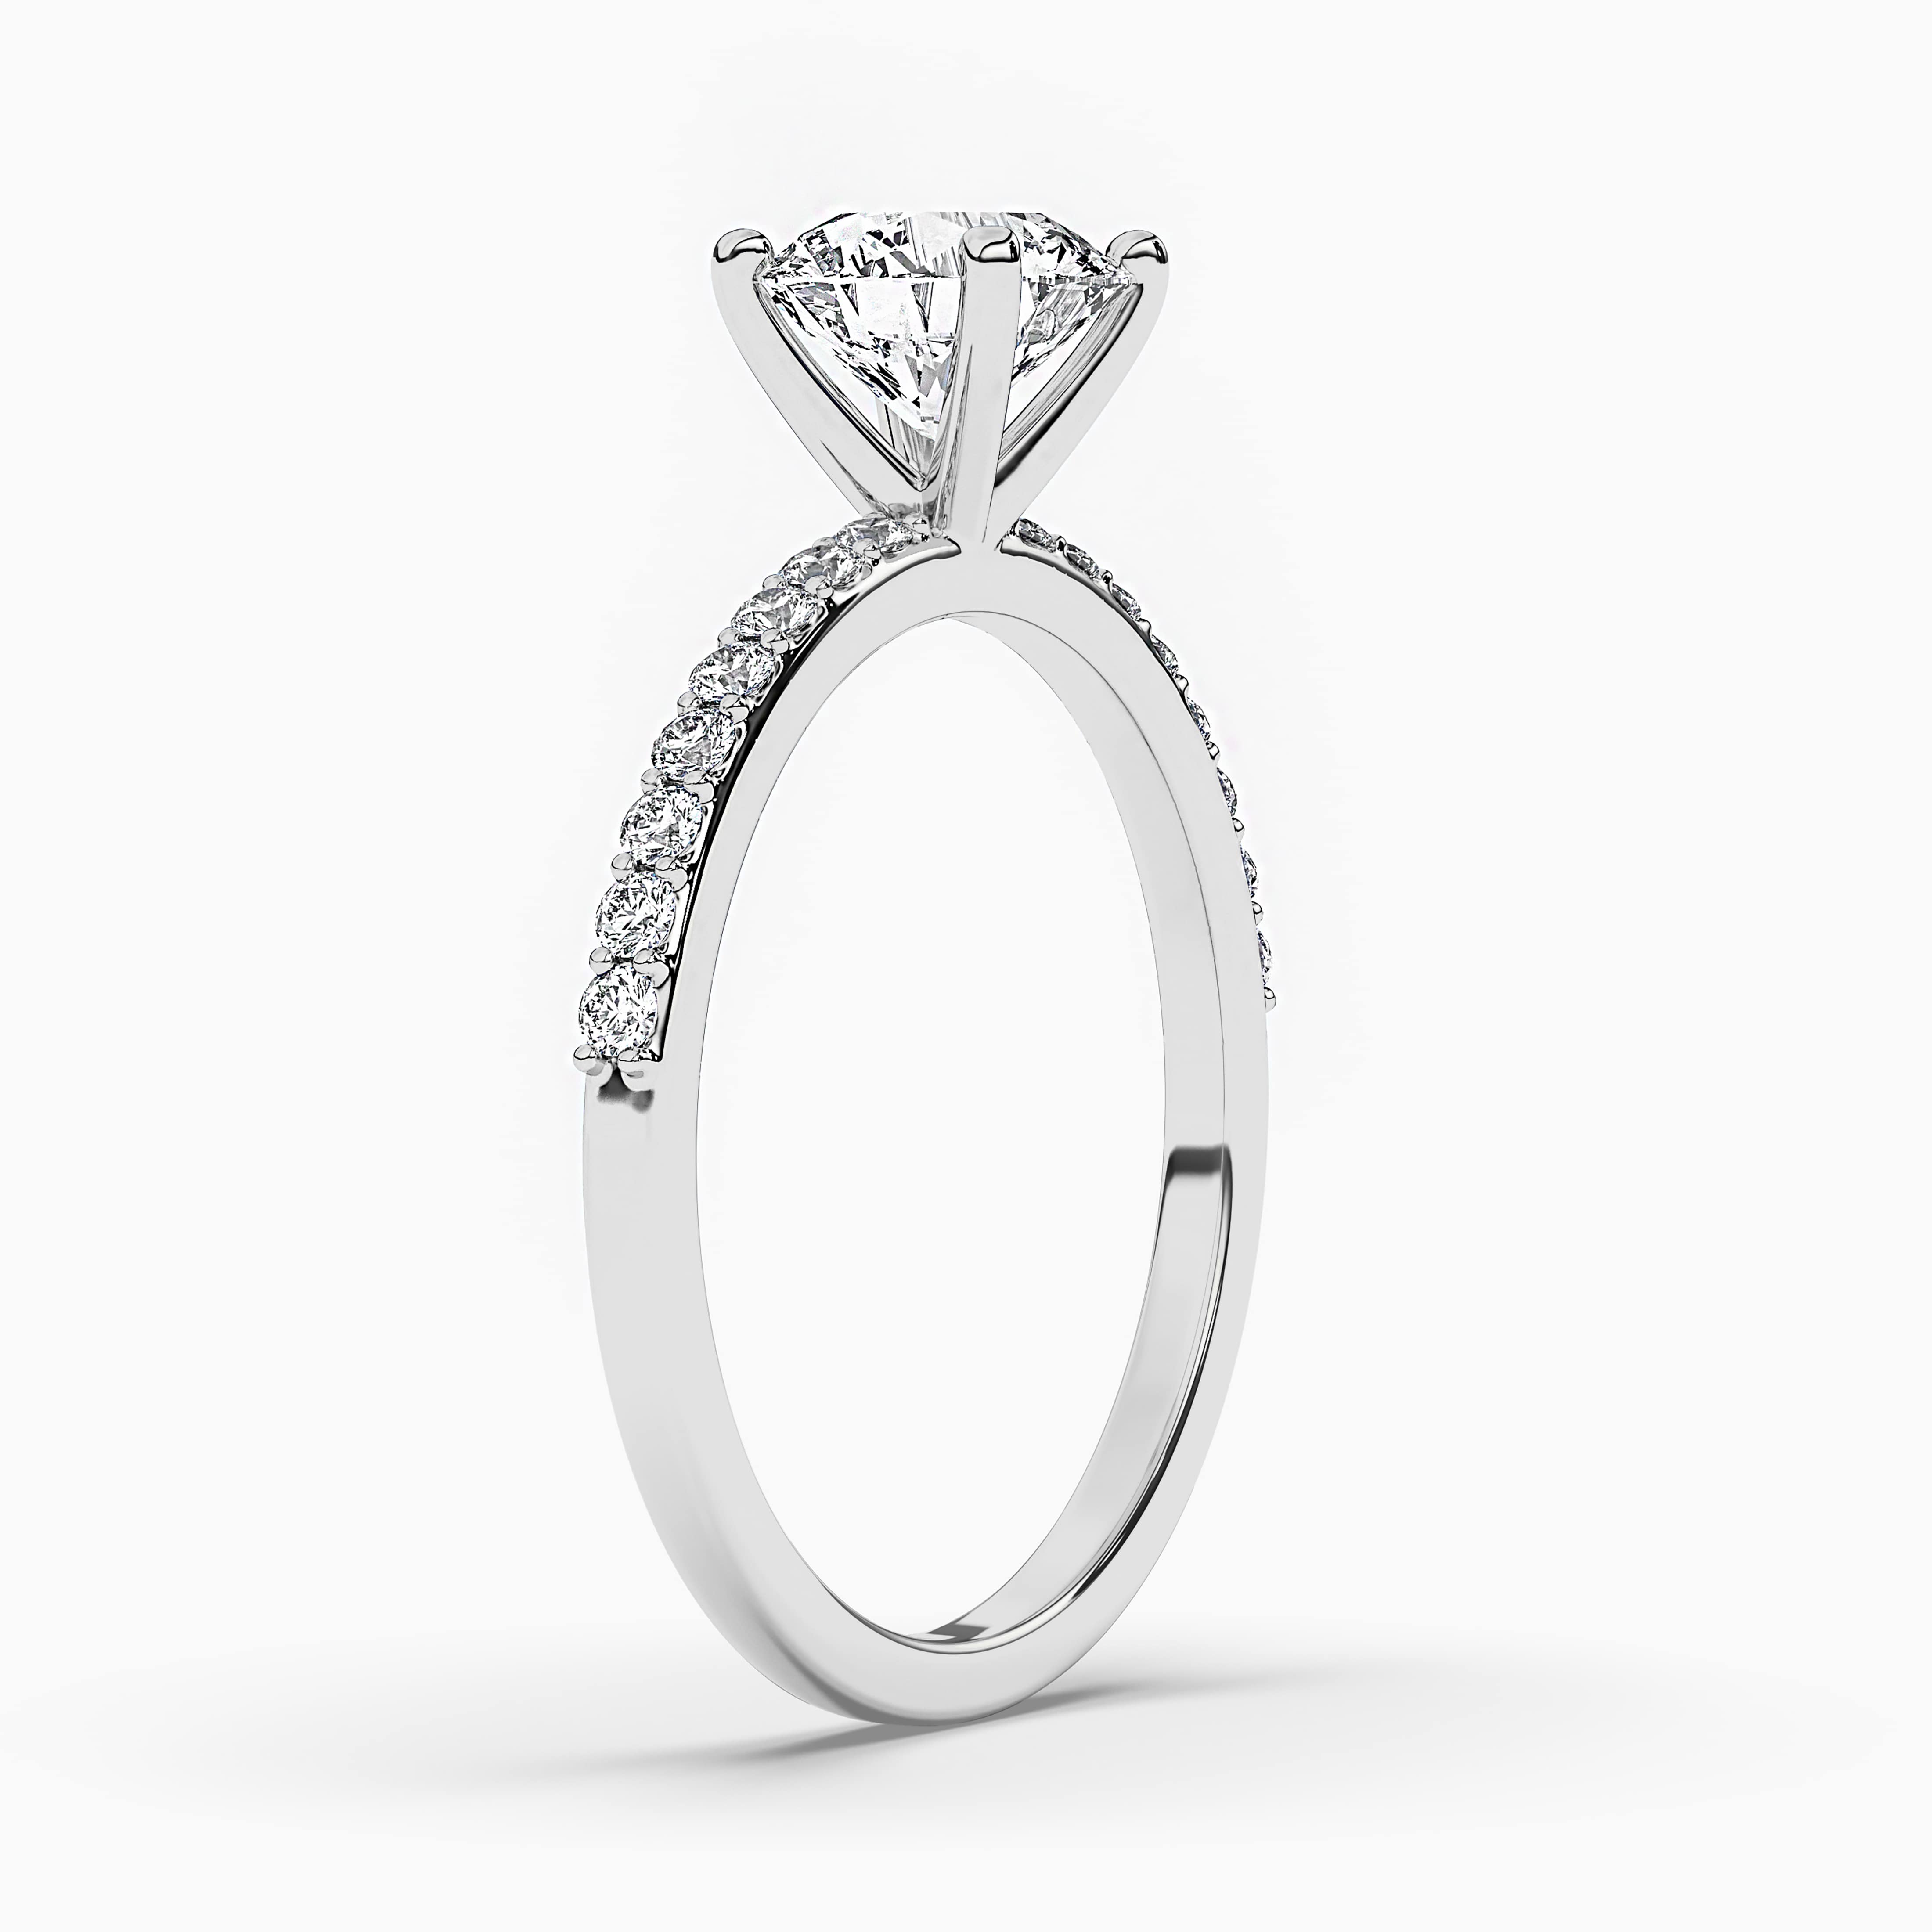 ROUND CUT MOISSANITE ENGAGEMENT RING, ROUND CUT SIDE STONES